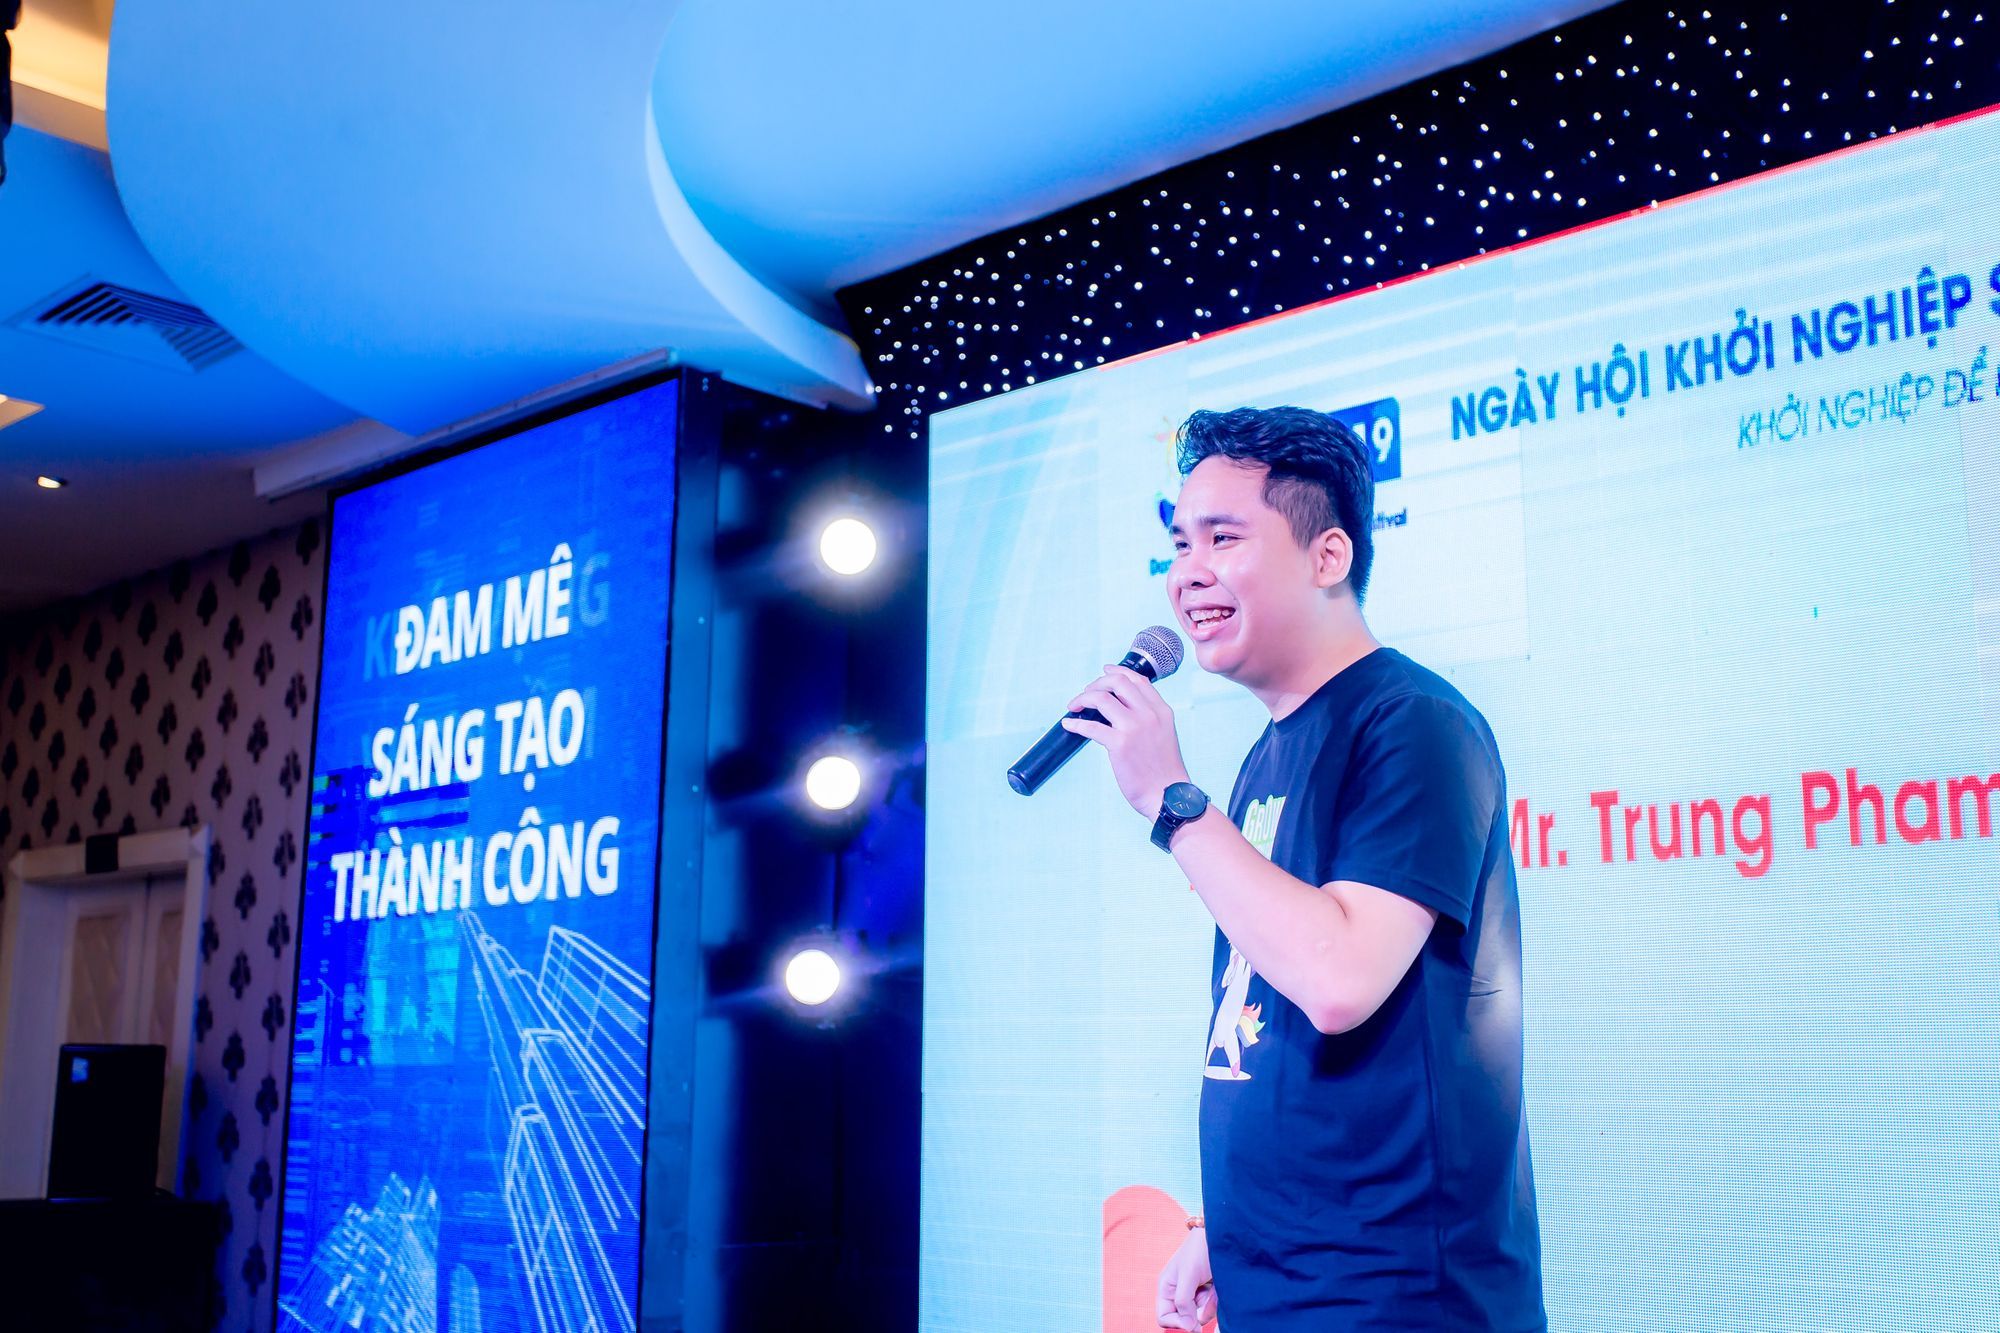 DNES: Incubation, Acceleration, and Coworking in Da Nang